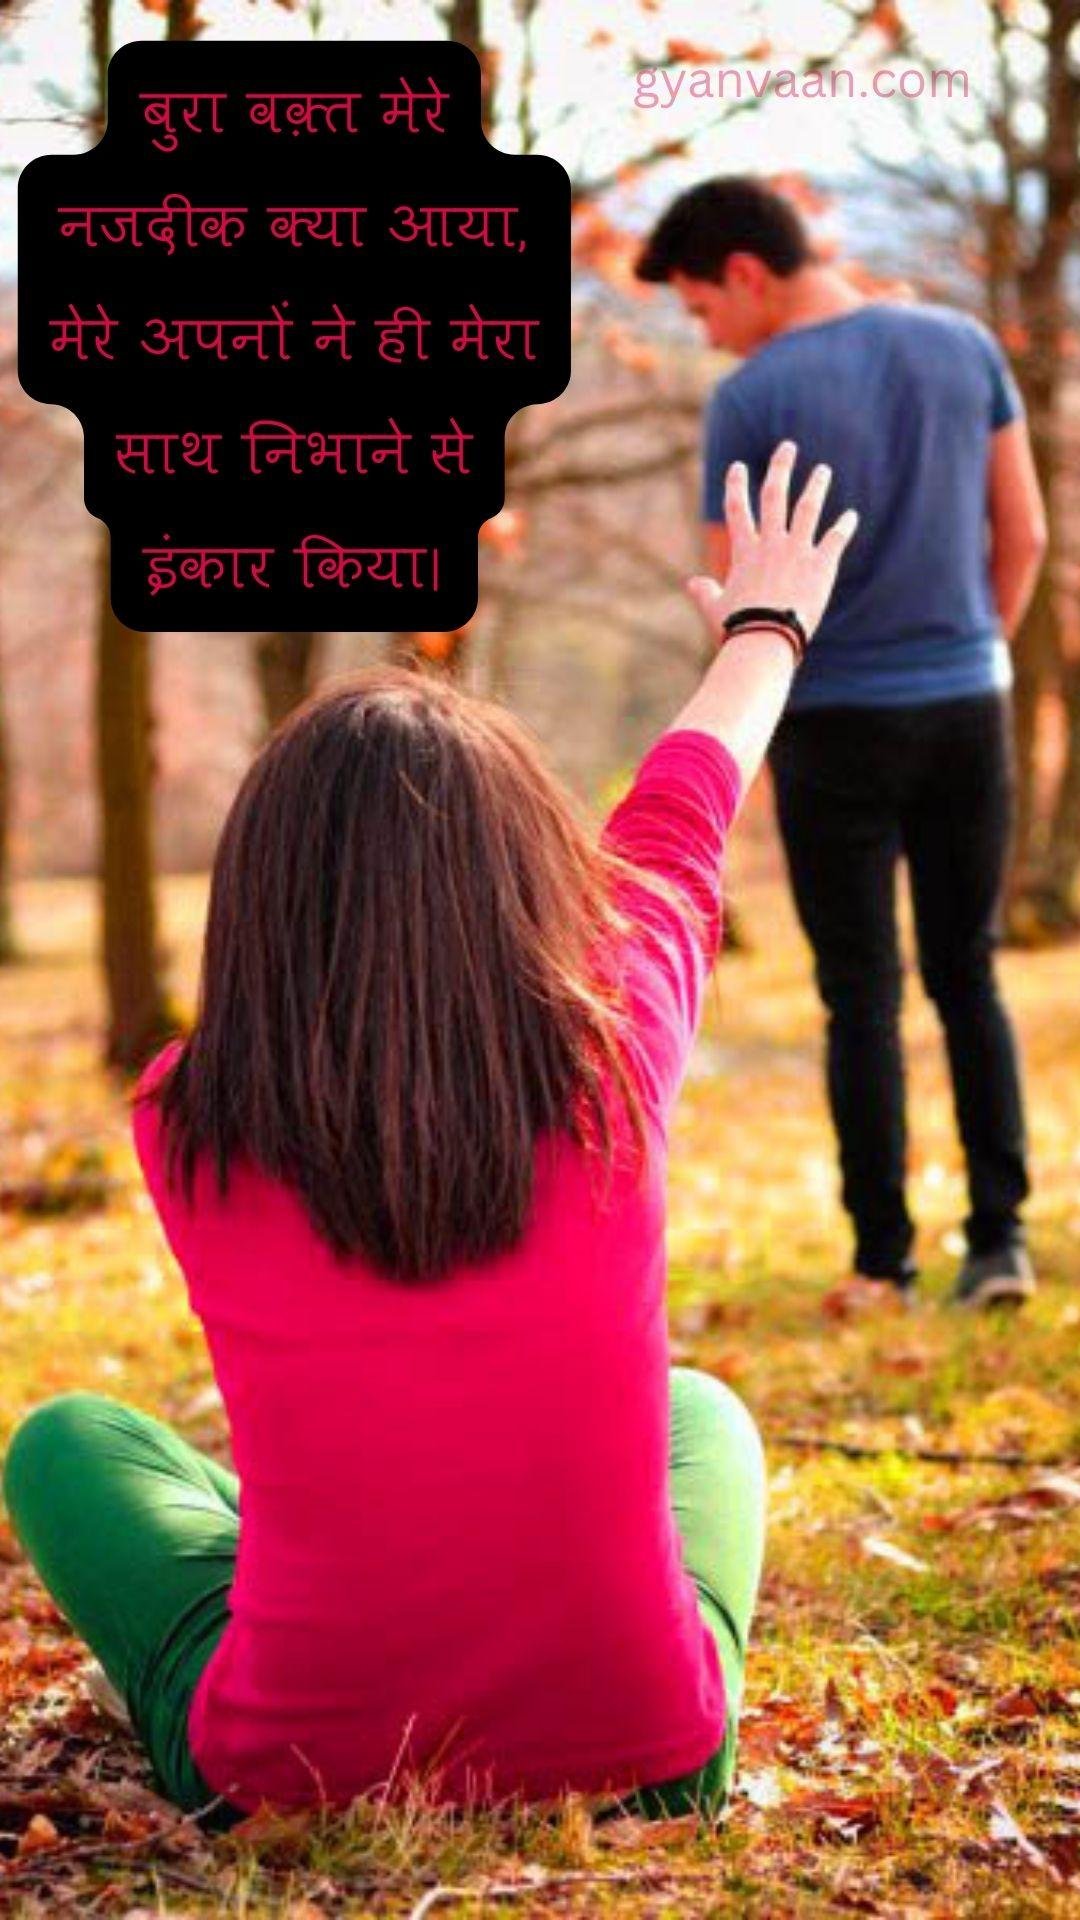 Very Heart Touching Sad Quotes In Hindi For Mobile Devices 9 - Very Heart Touching Sad Quotes In Hindi